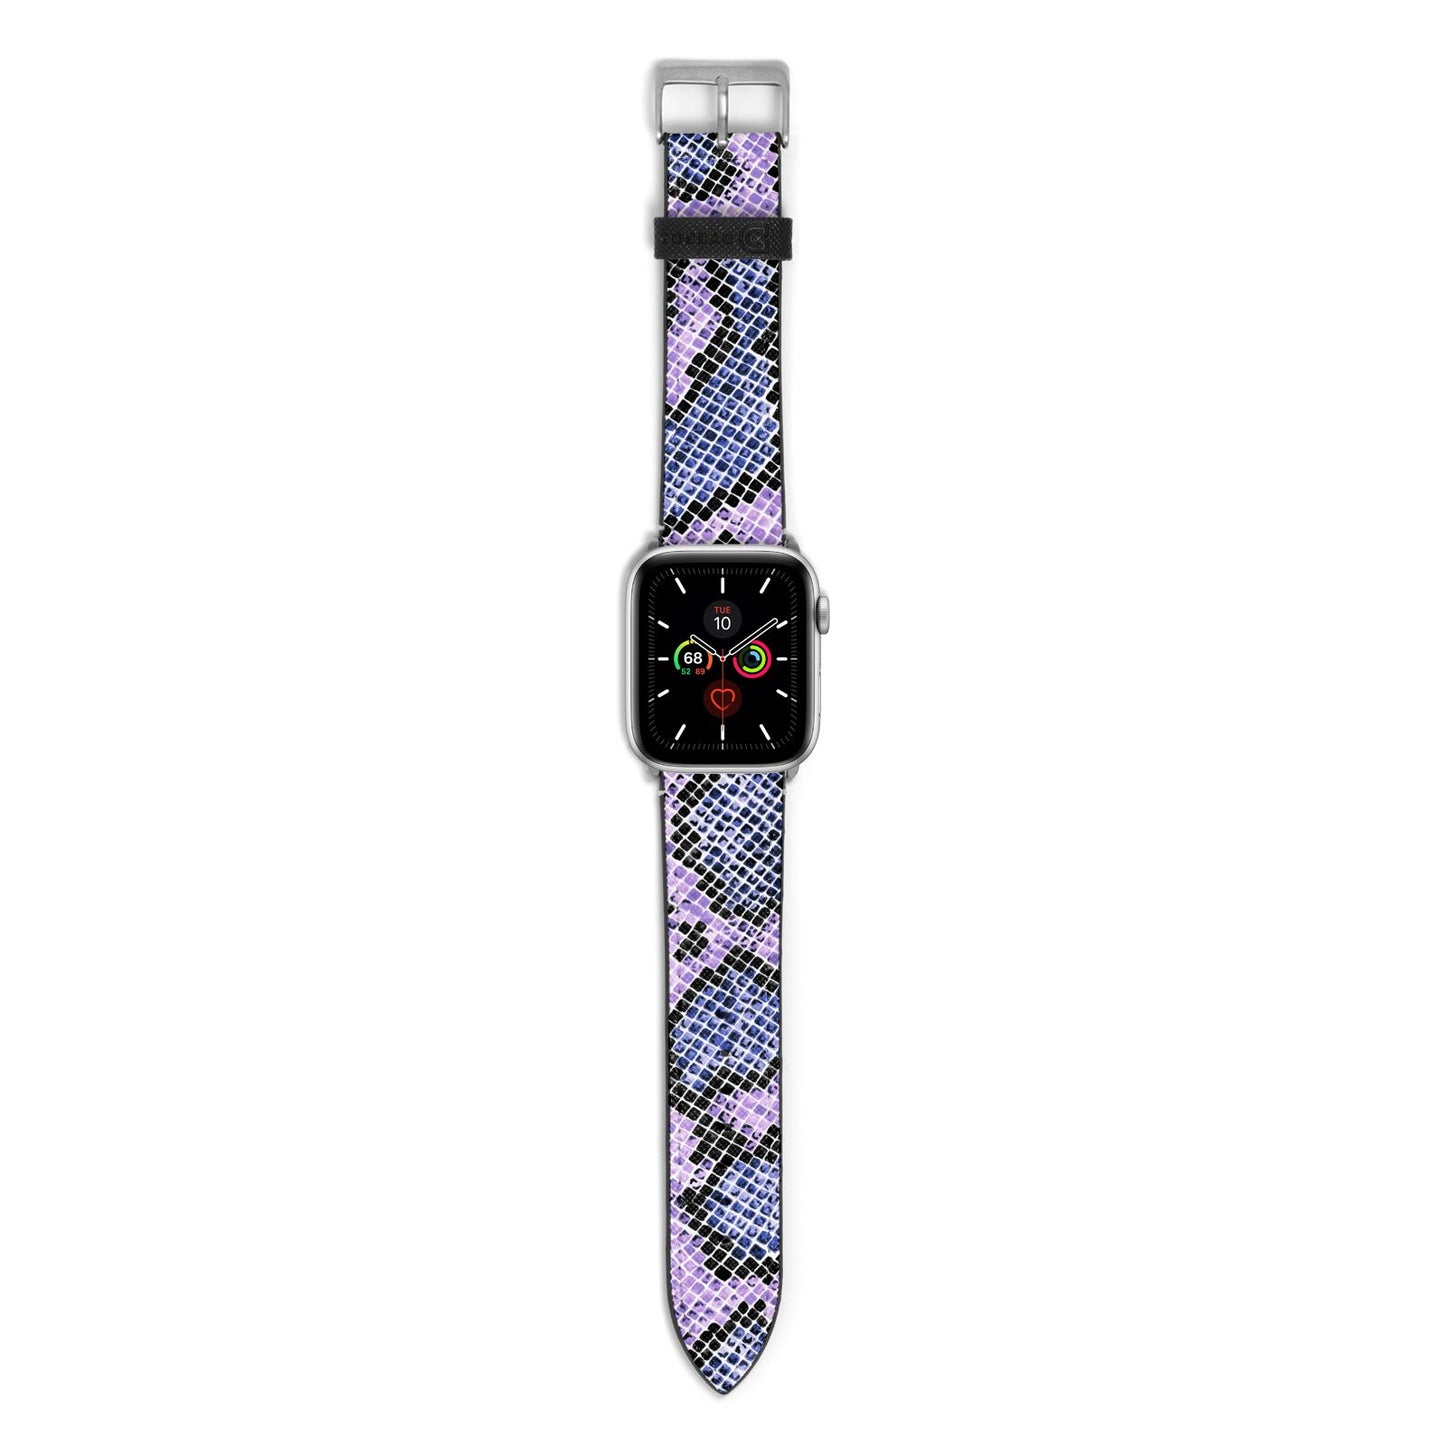 Purple And Blue Snakeskin Apple Watch Strap with Silver Hardware